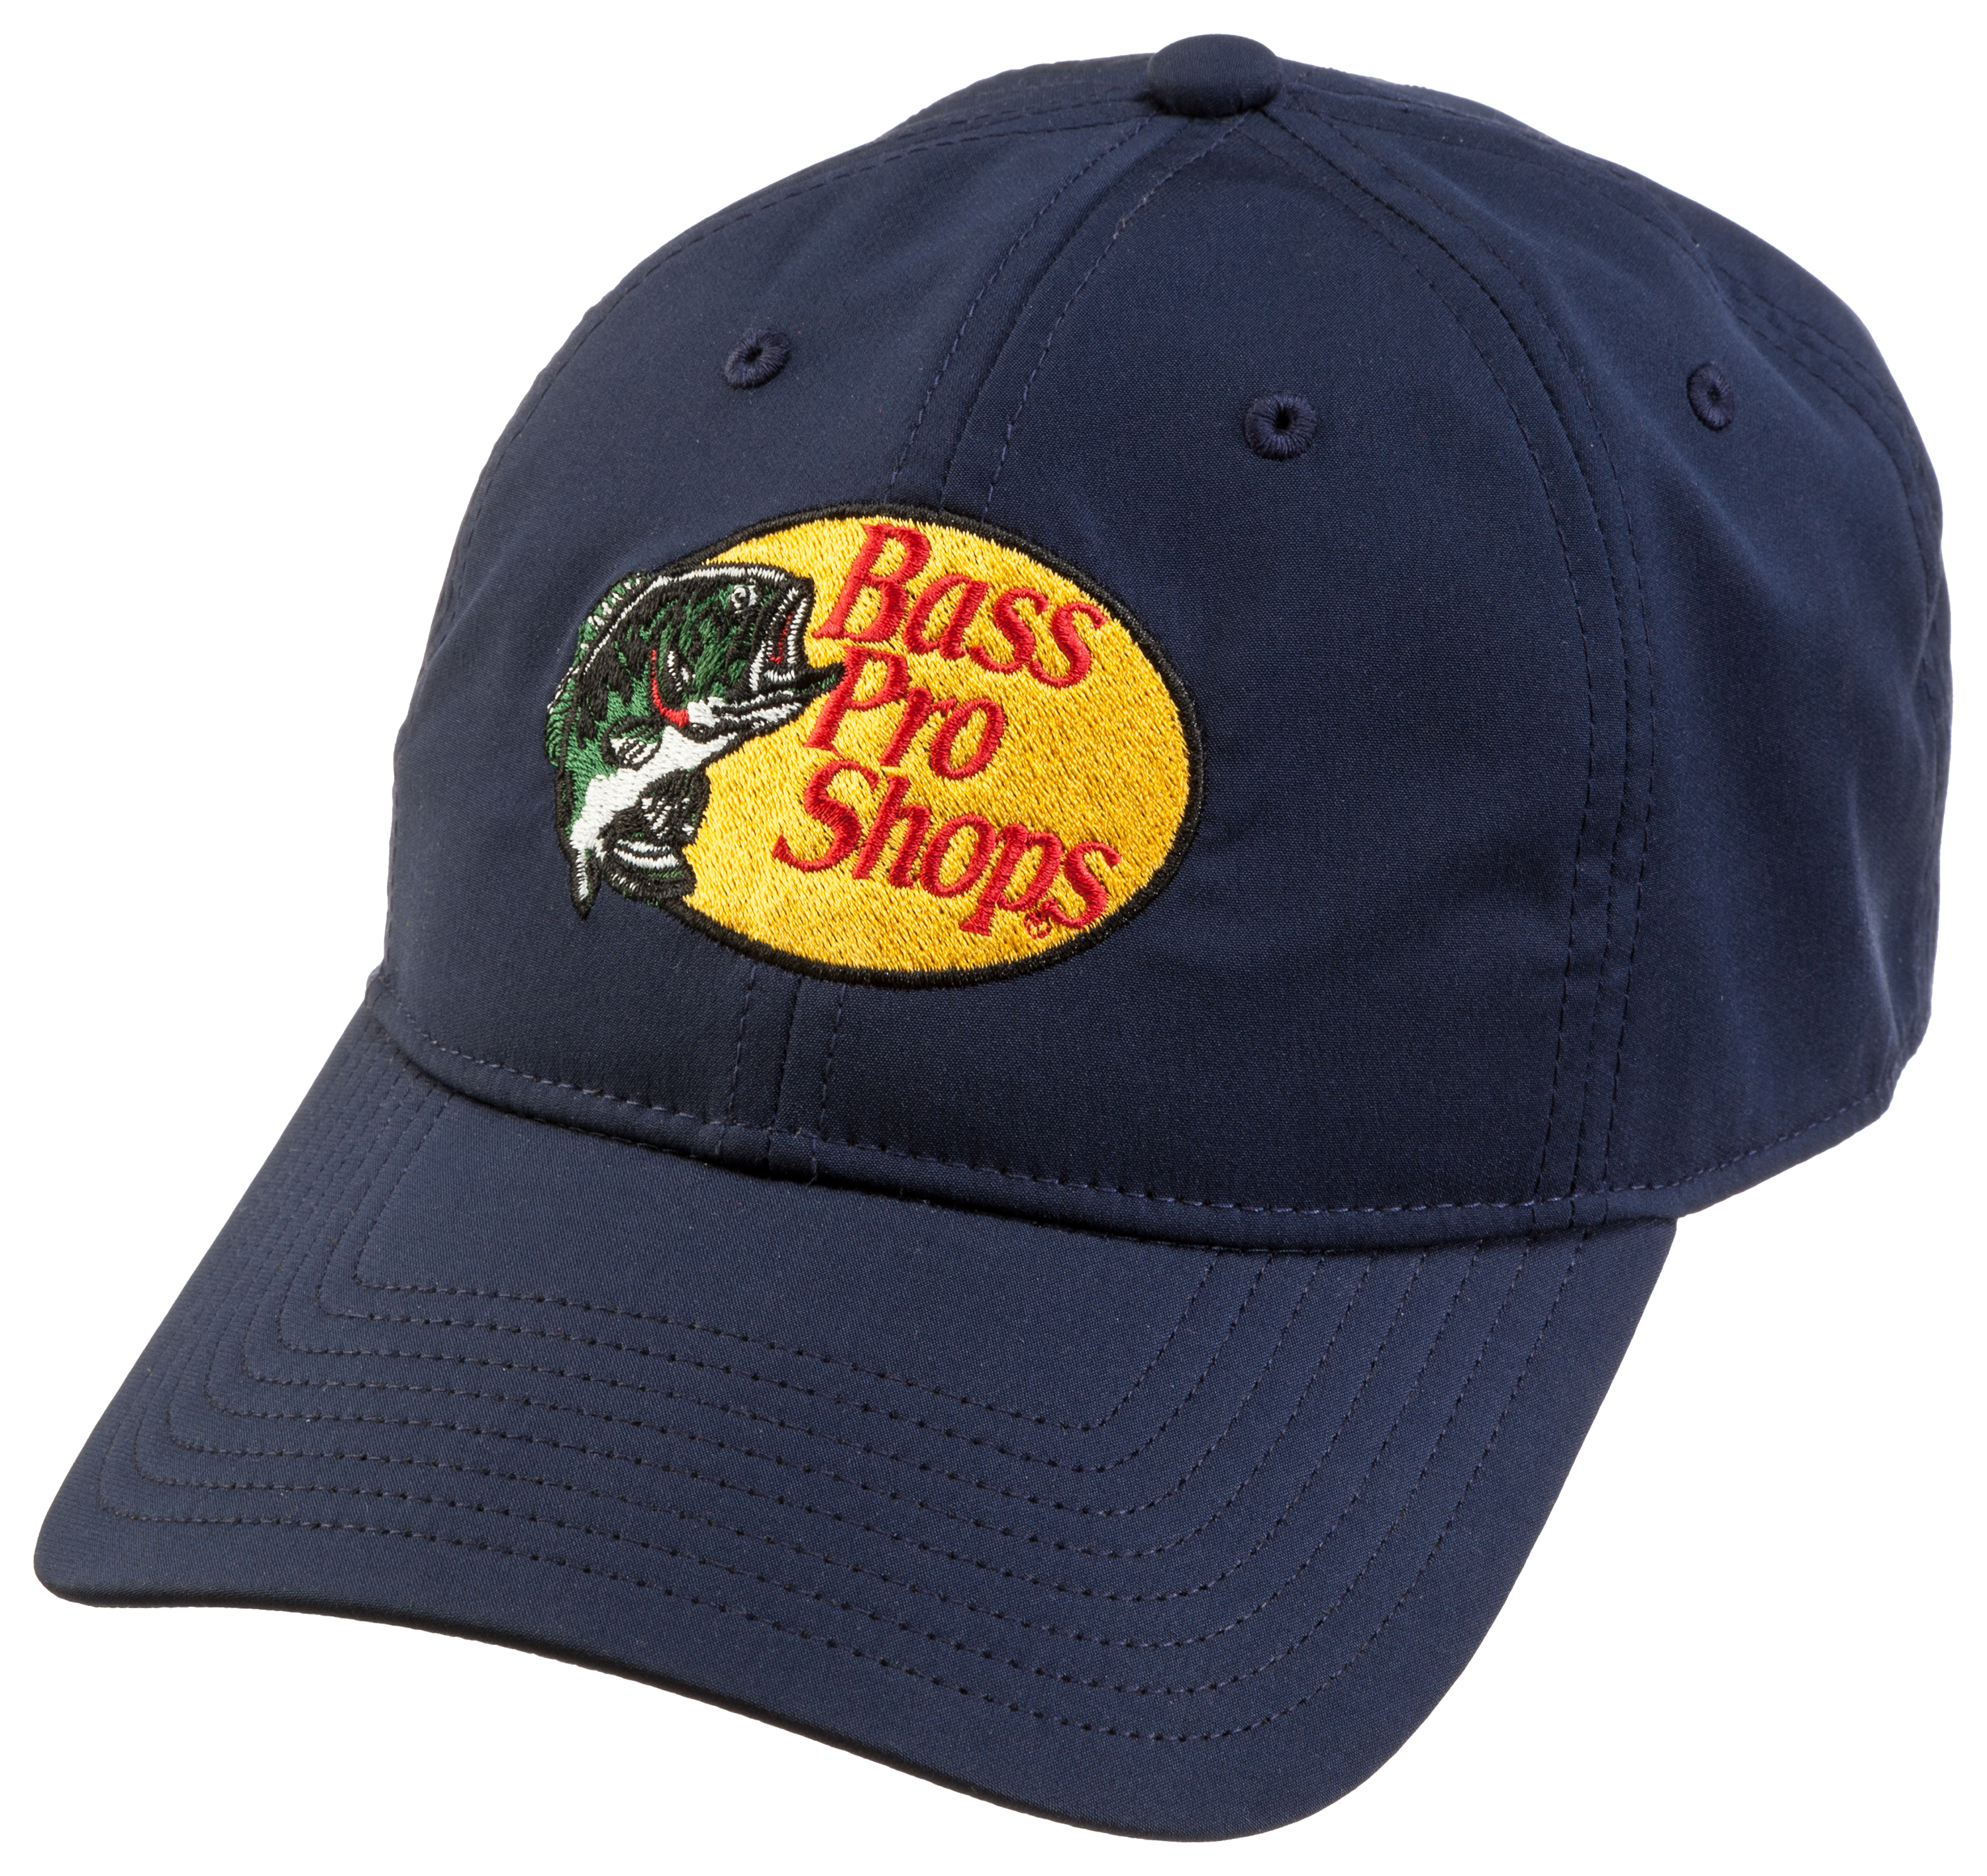 Ass Pro Shops Hat Great Hunting/fishing Hat -  Canada